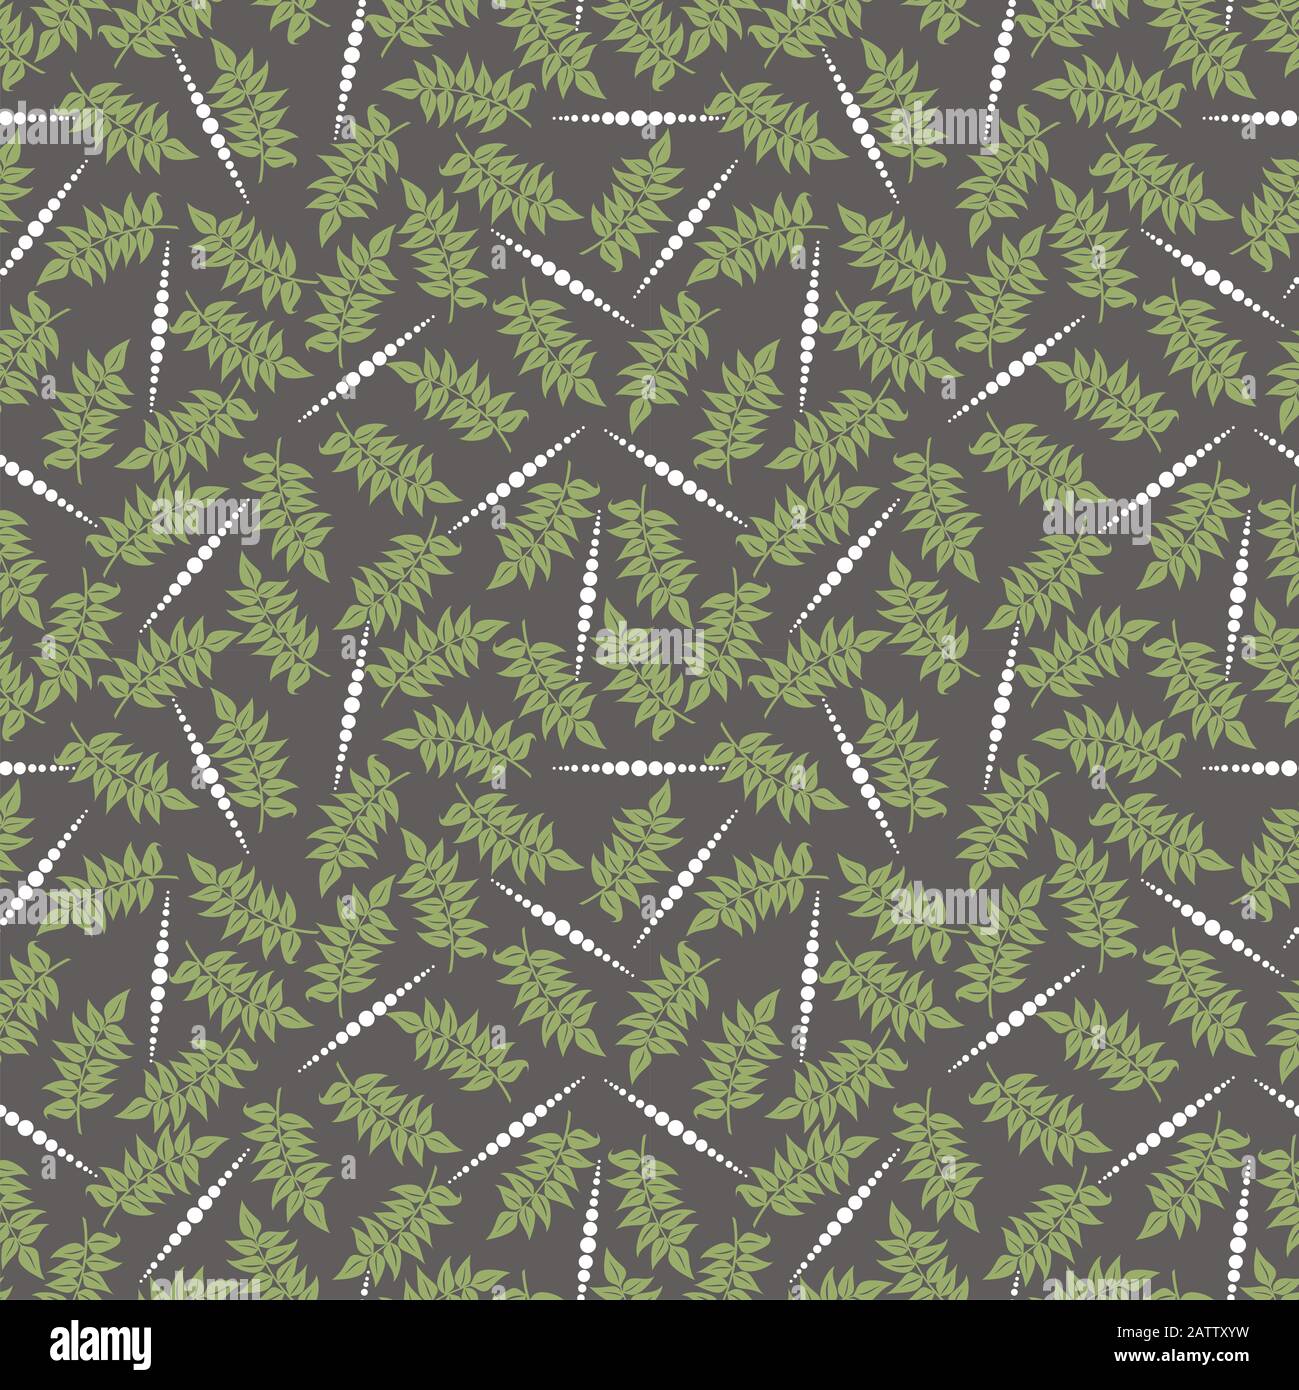 Seamless pattern or background of leaf and geometric Stock Photo